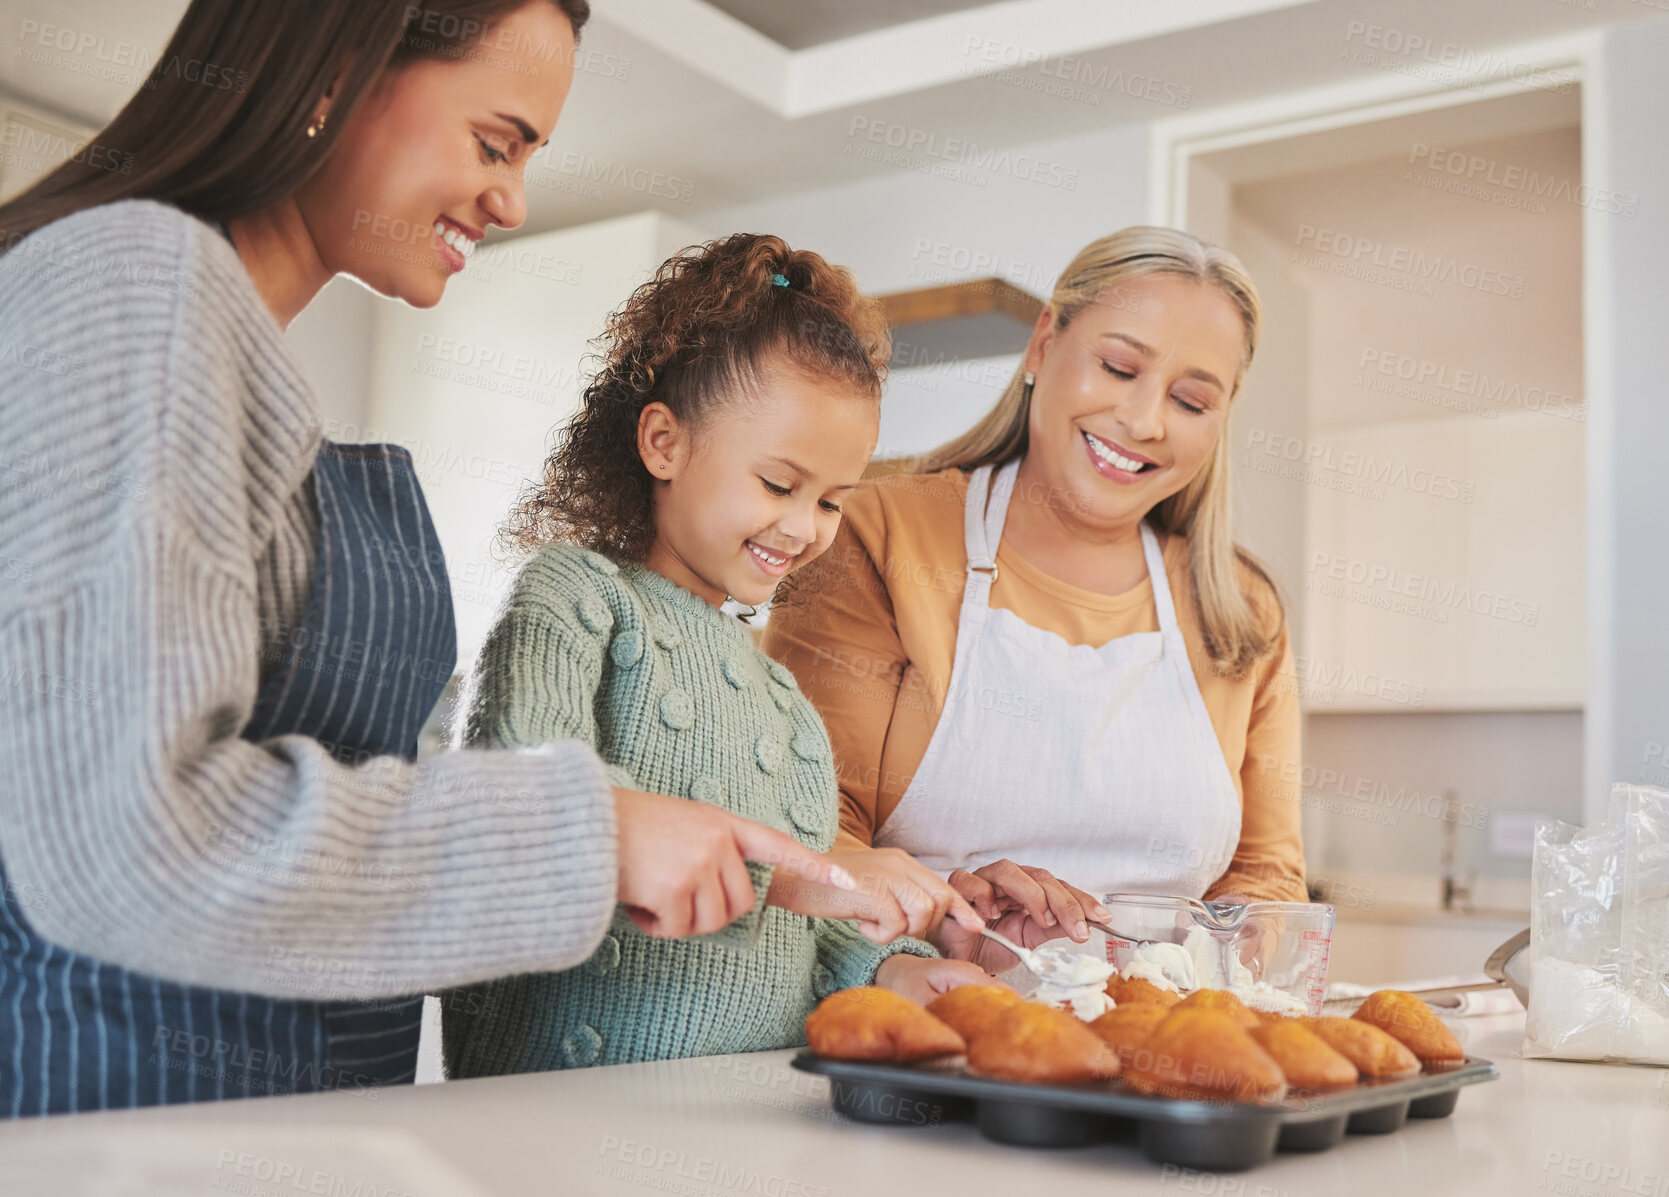 Buy stock photo Shot of a little girl baking with her mother and grandmother at home